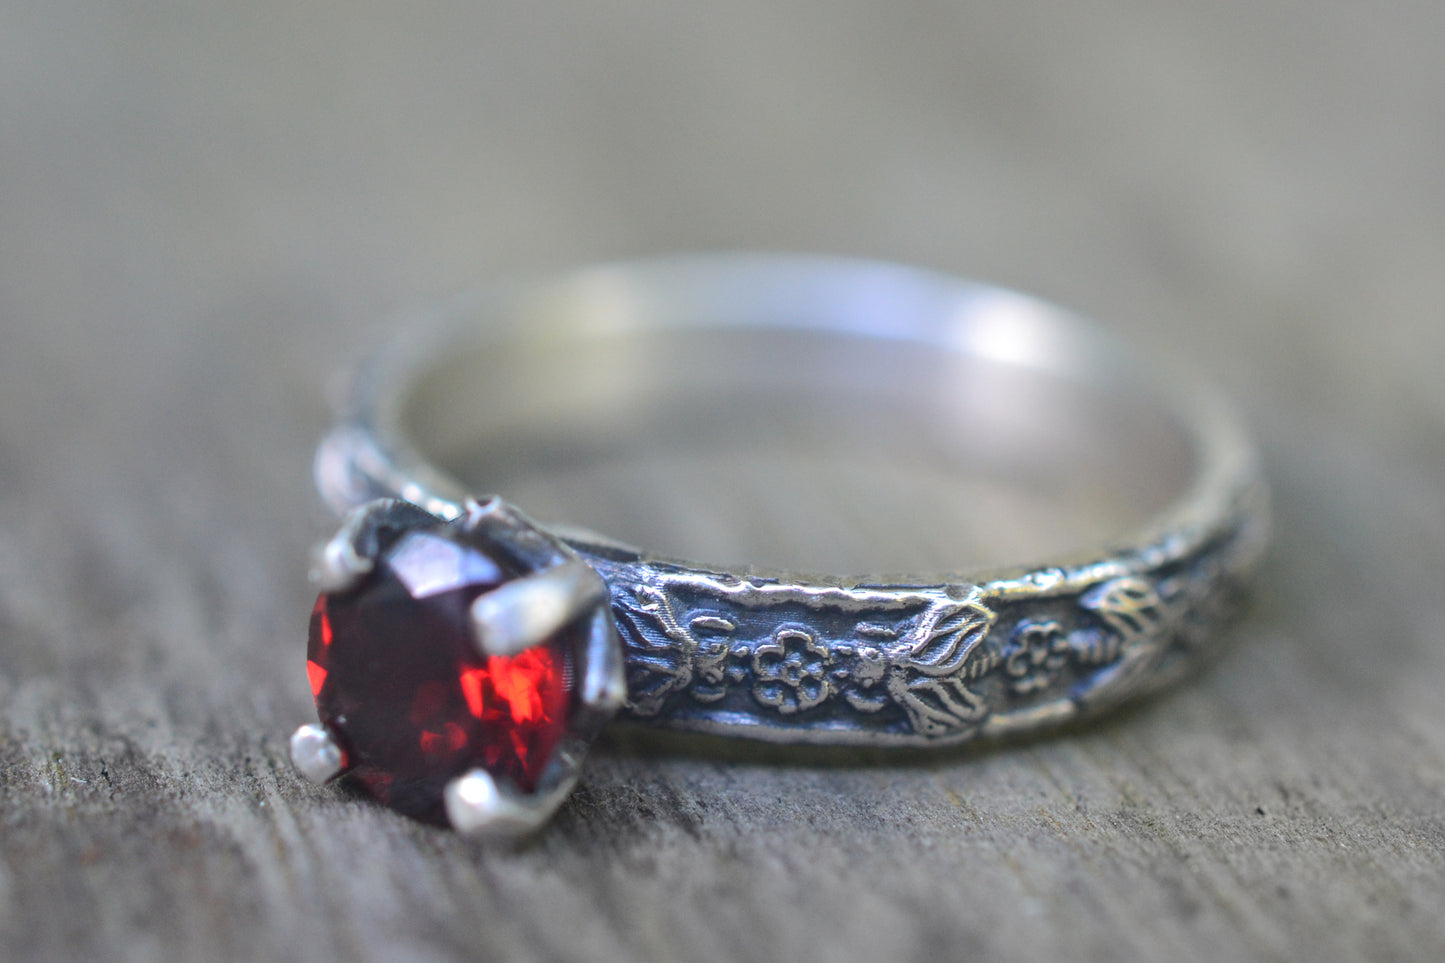 6mm Garnet Solitaire Ring With Honeybee Band